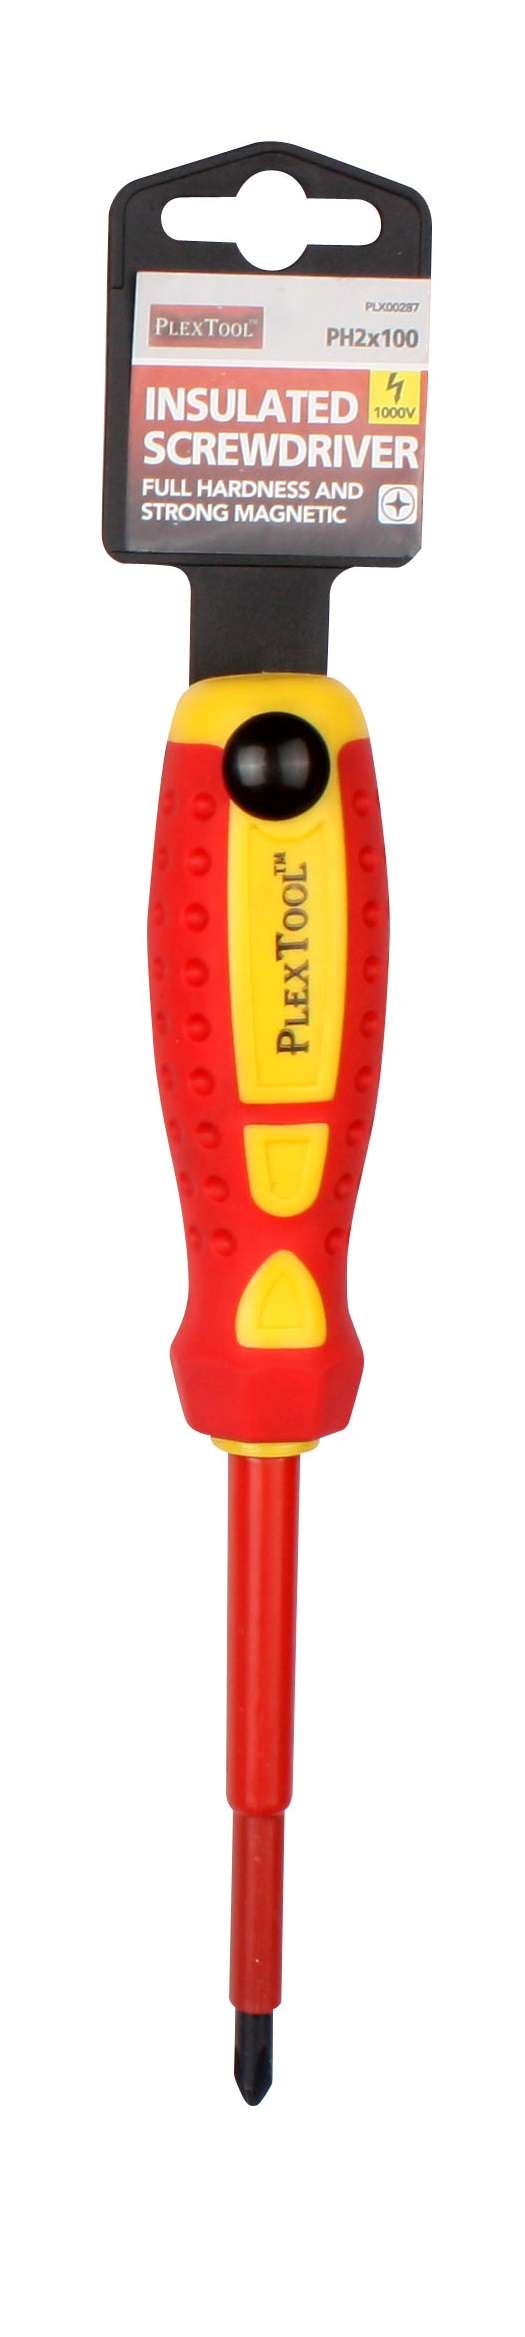 4"L x PH2 Full Hardness Strong Magnetic Insulated Screwdriver - 1